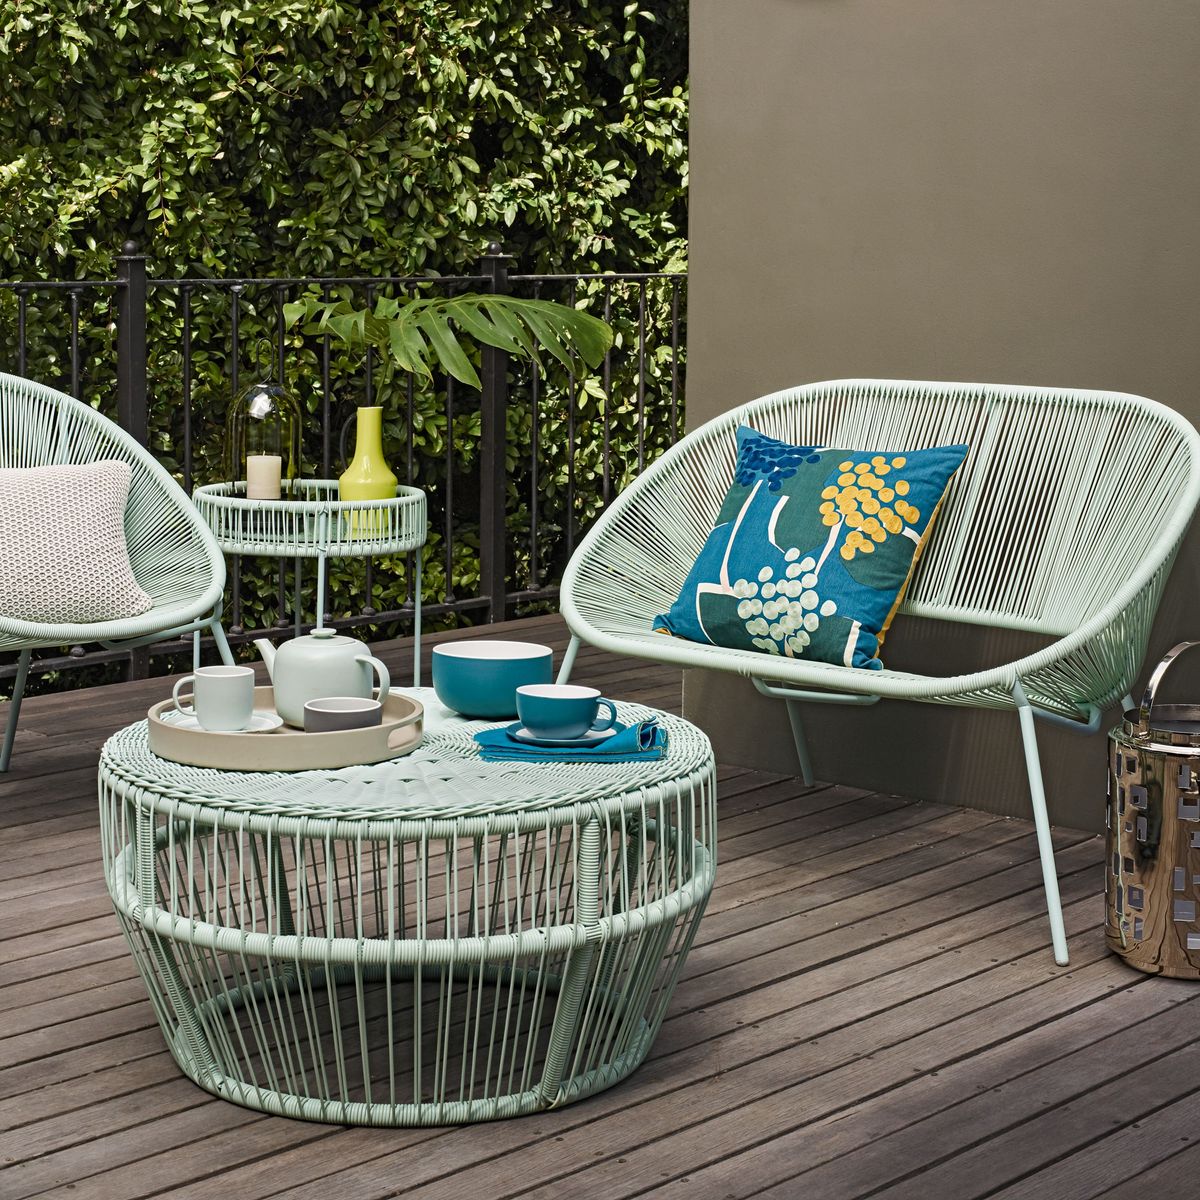 John Lewis slashes 20% off garden furniture and BBQs ahead of Prime Day | Real Homes